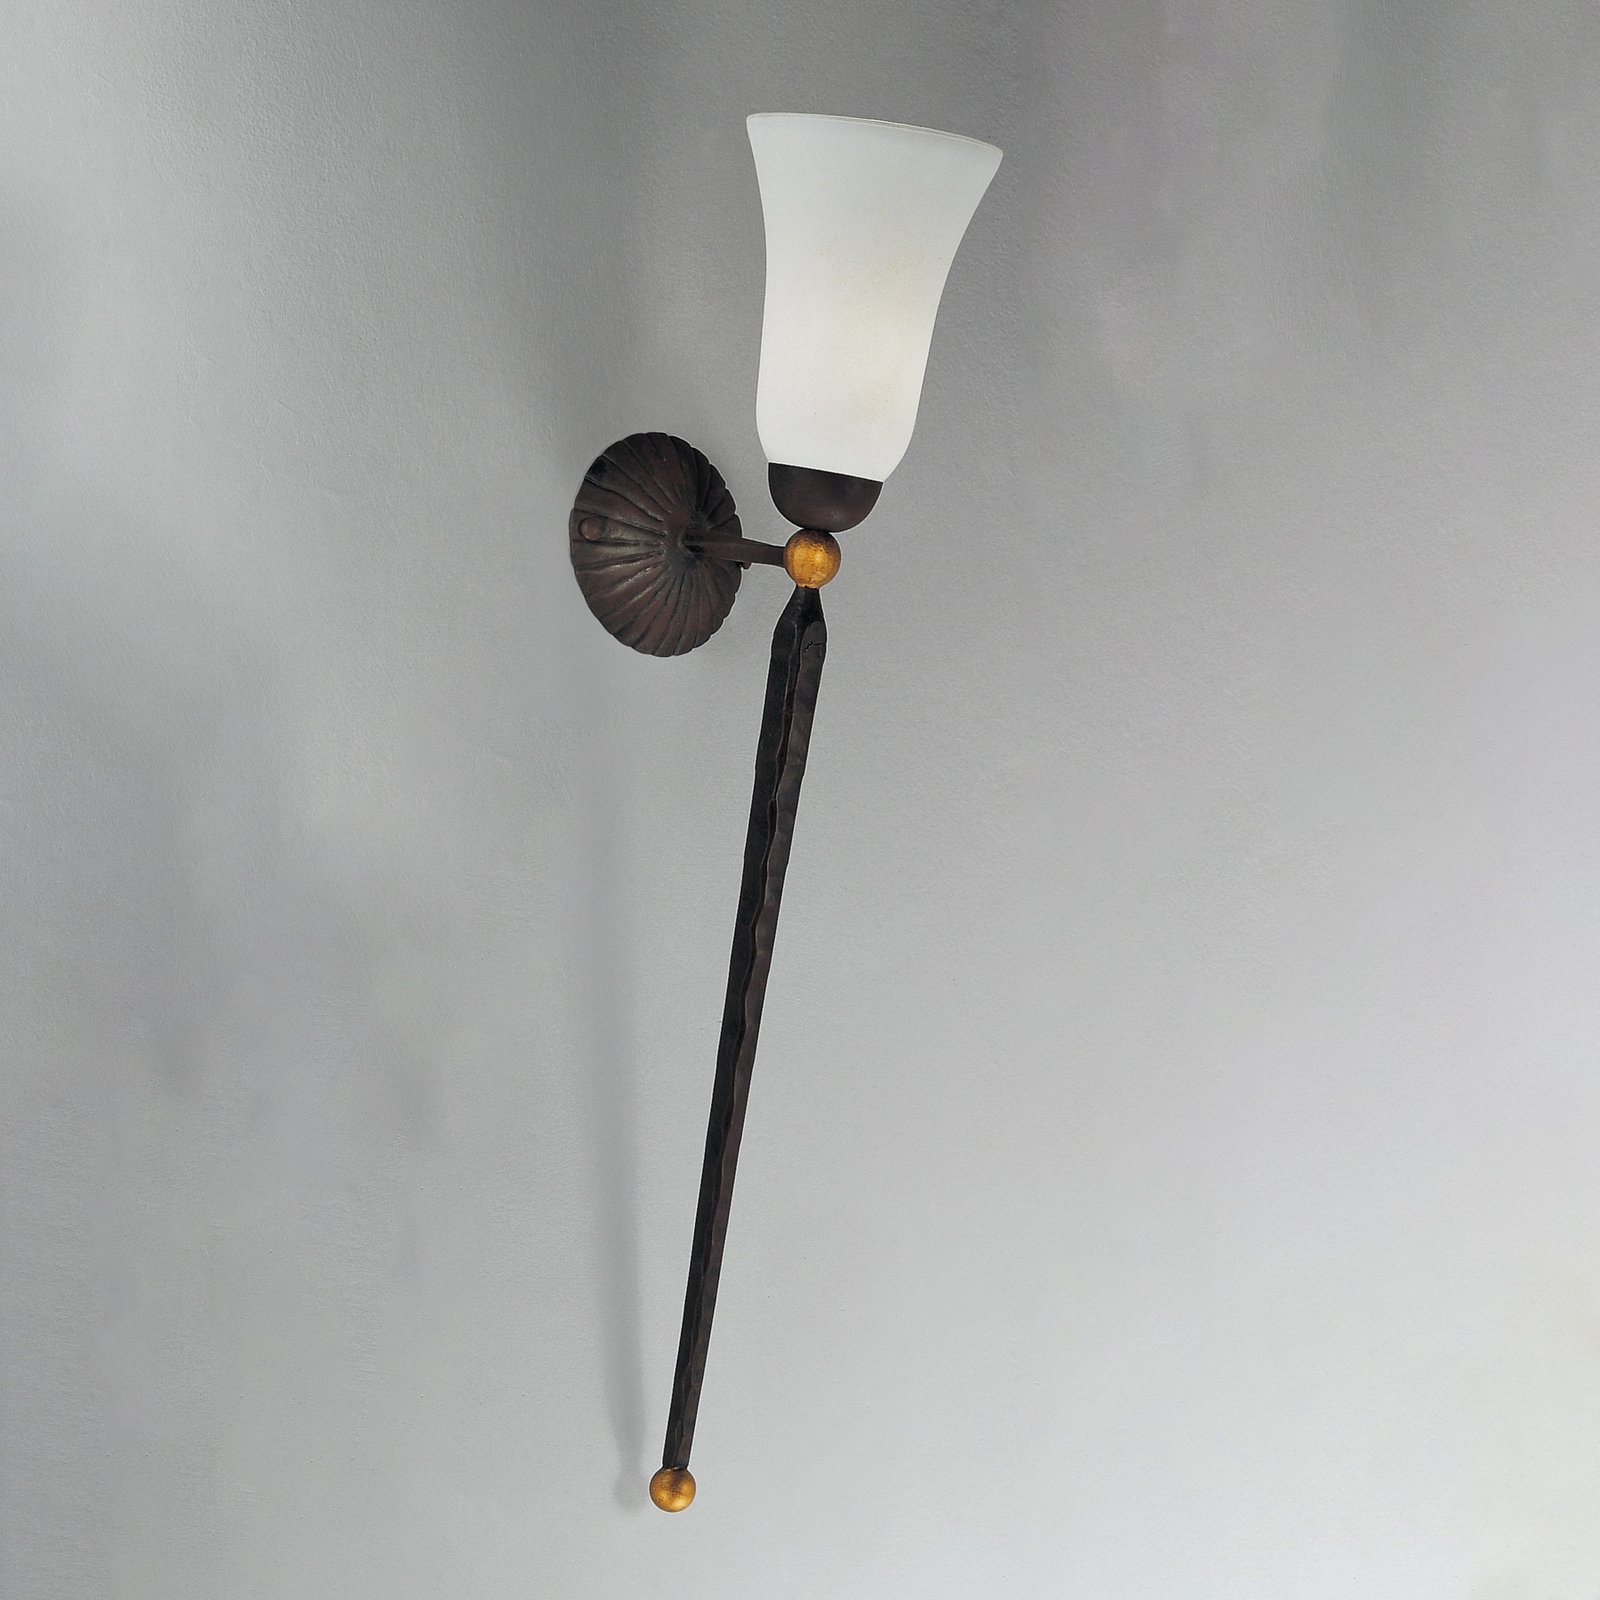 Antico wall torch, wrought iron, sanded glass